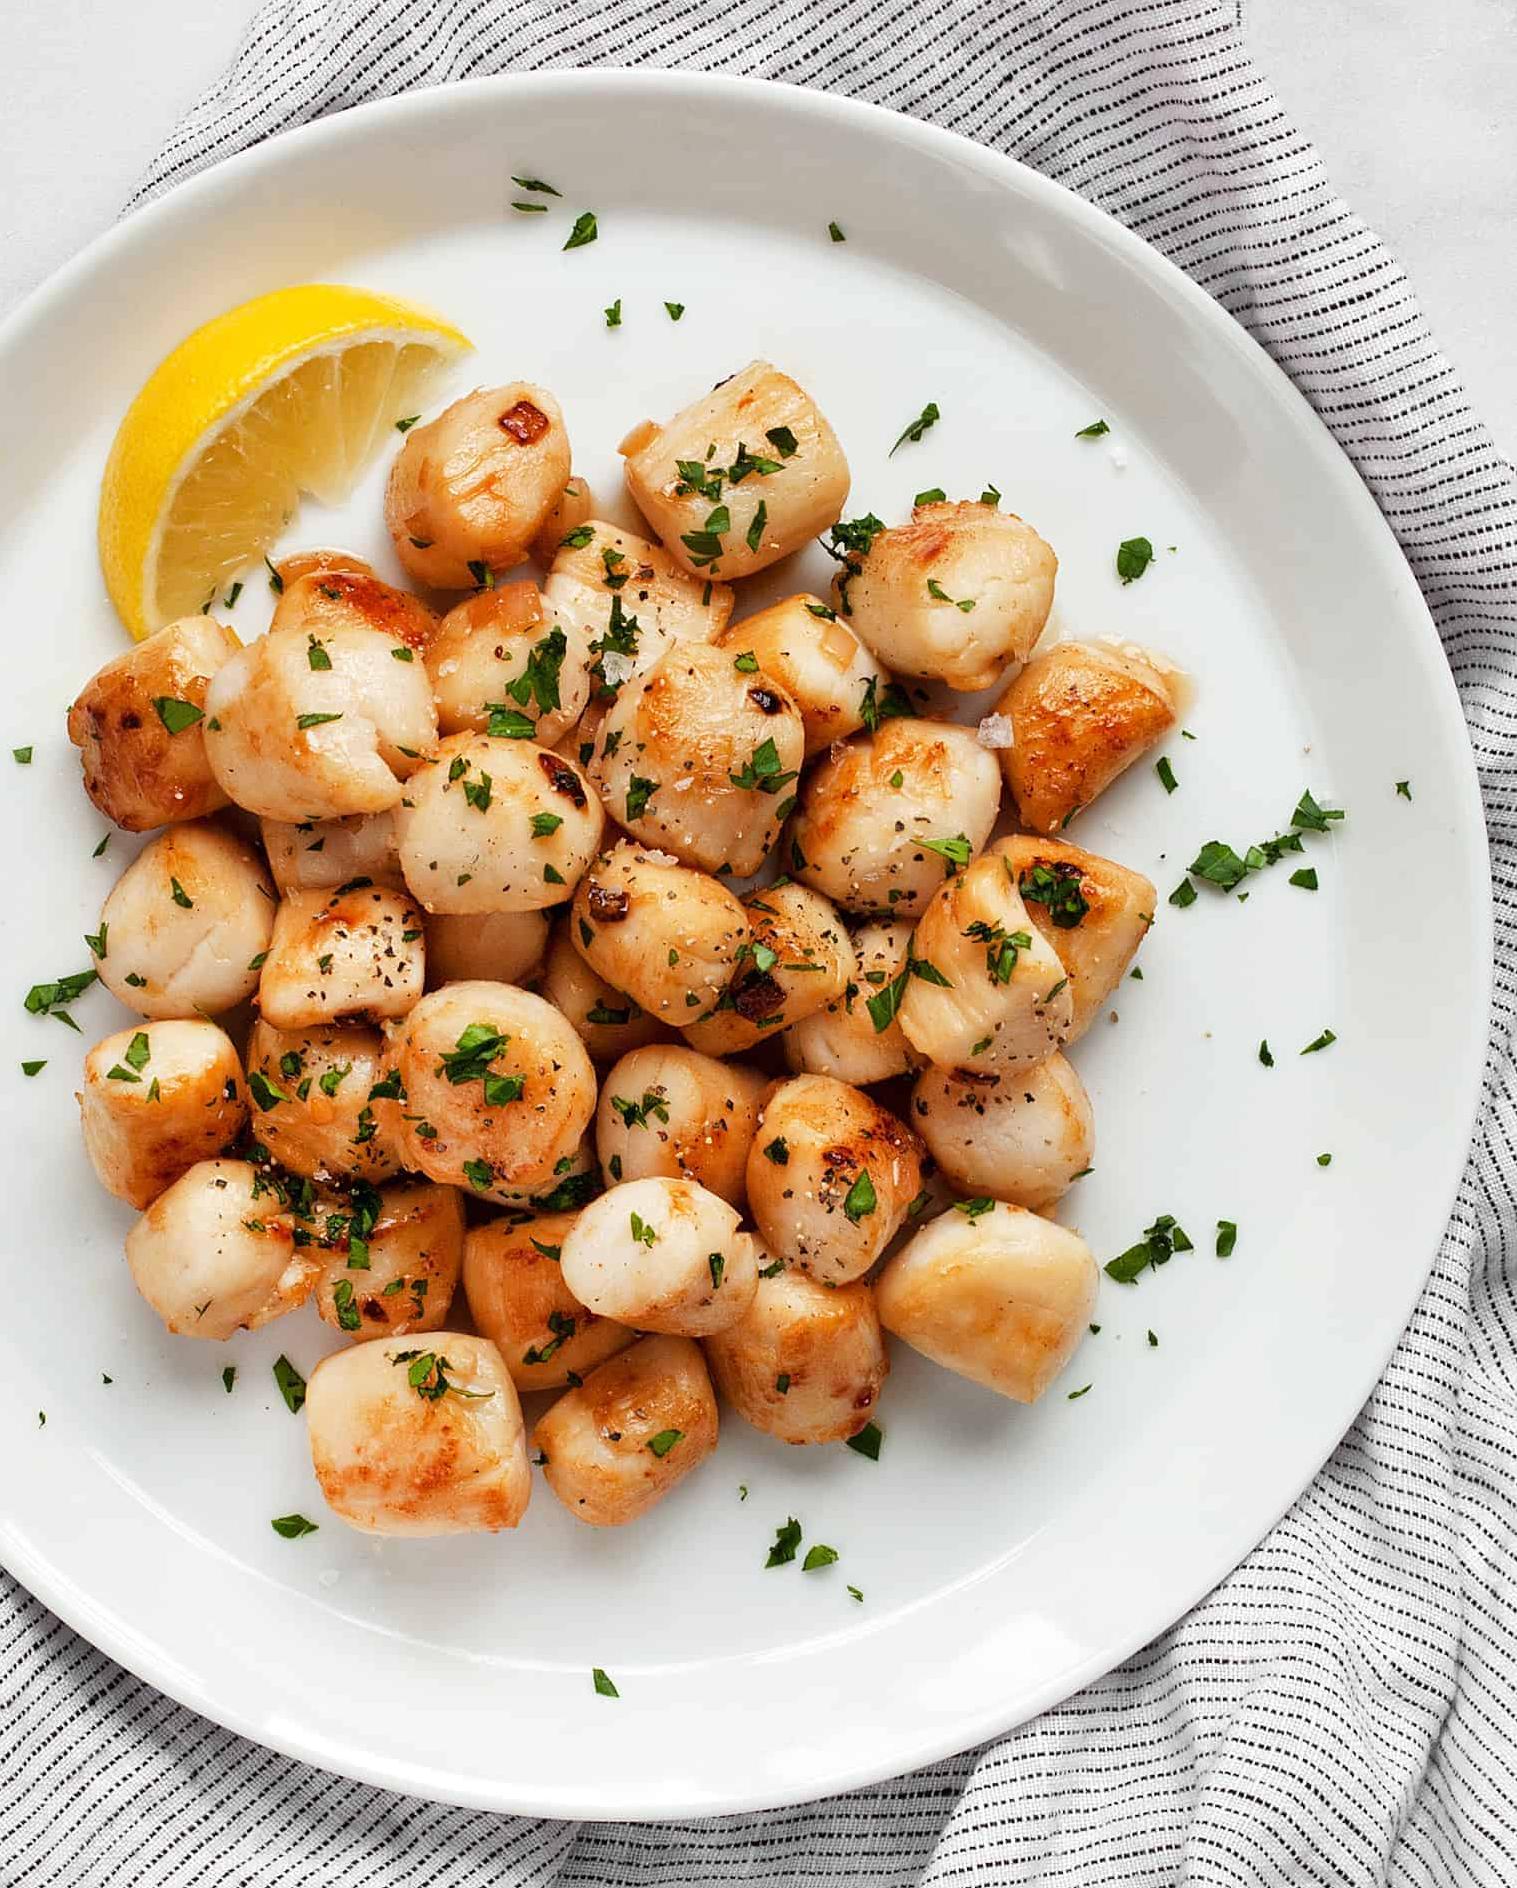  Succulent and flavorful, these scallops in wine are a mouth-watering treat.